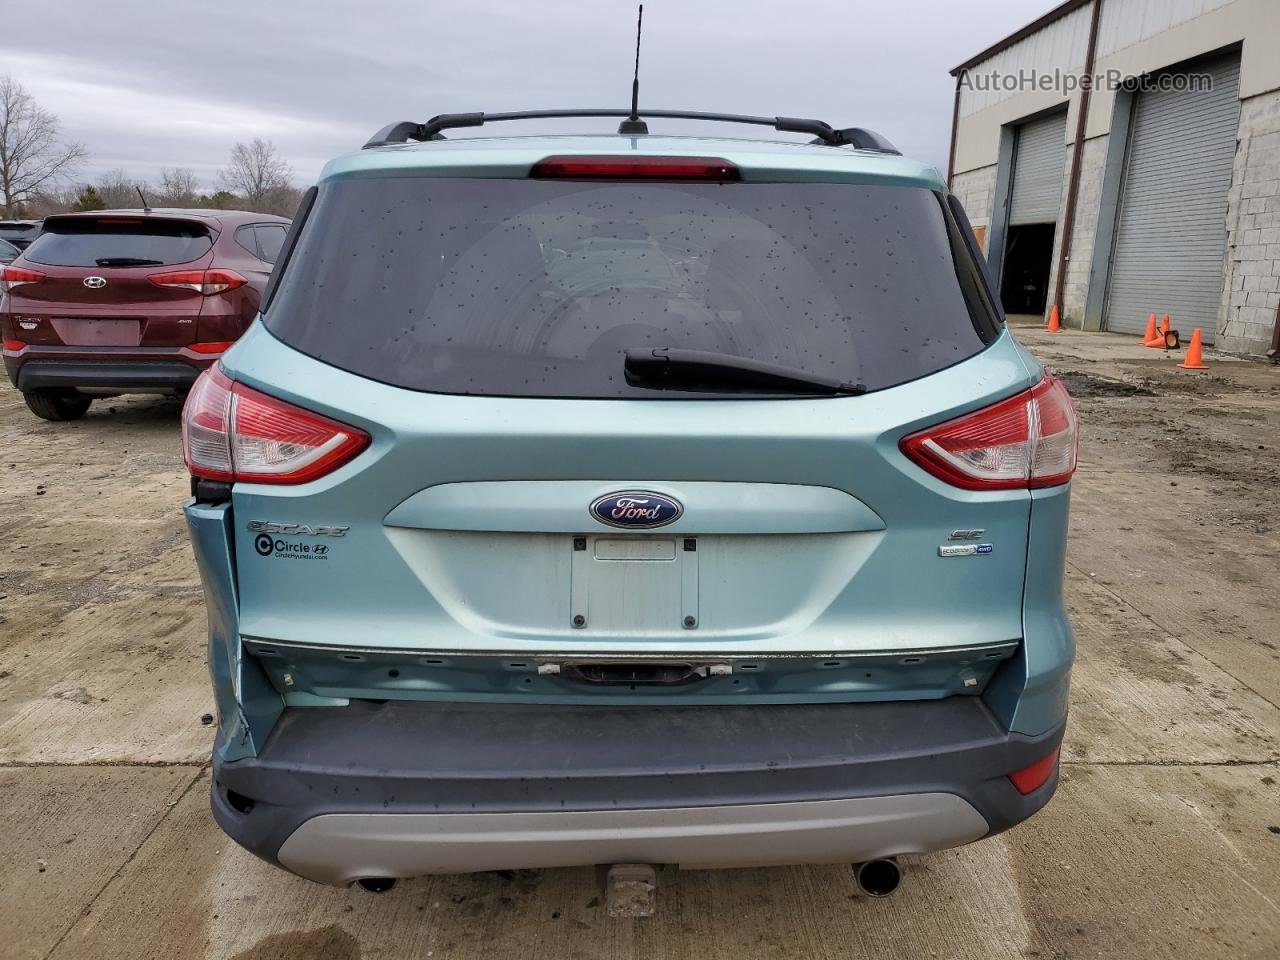 2013 Ford Escape Se Turquoise vin: 1FMCU9G96DUD07063